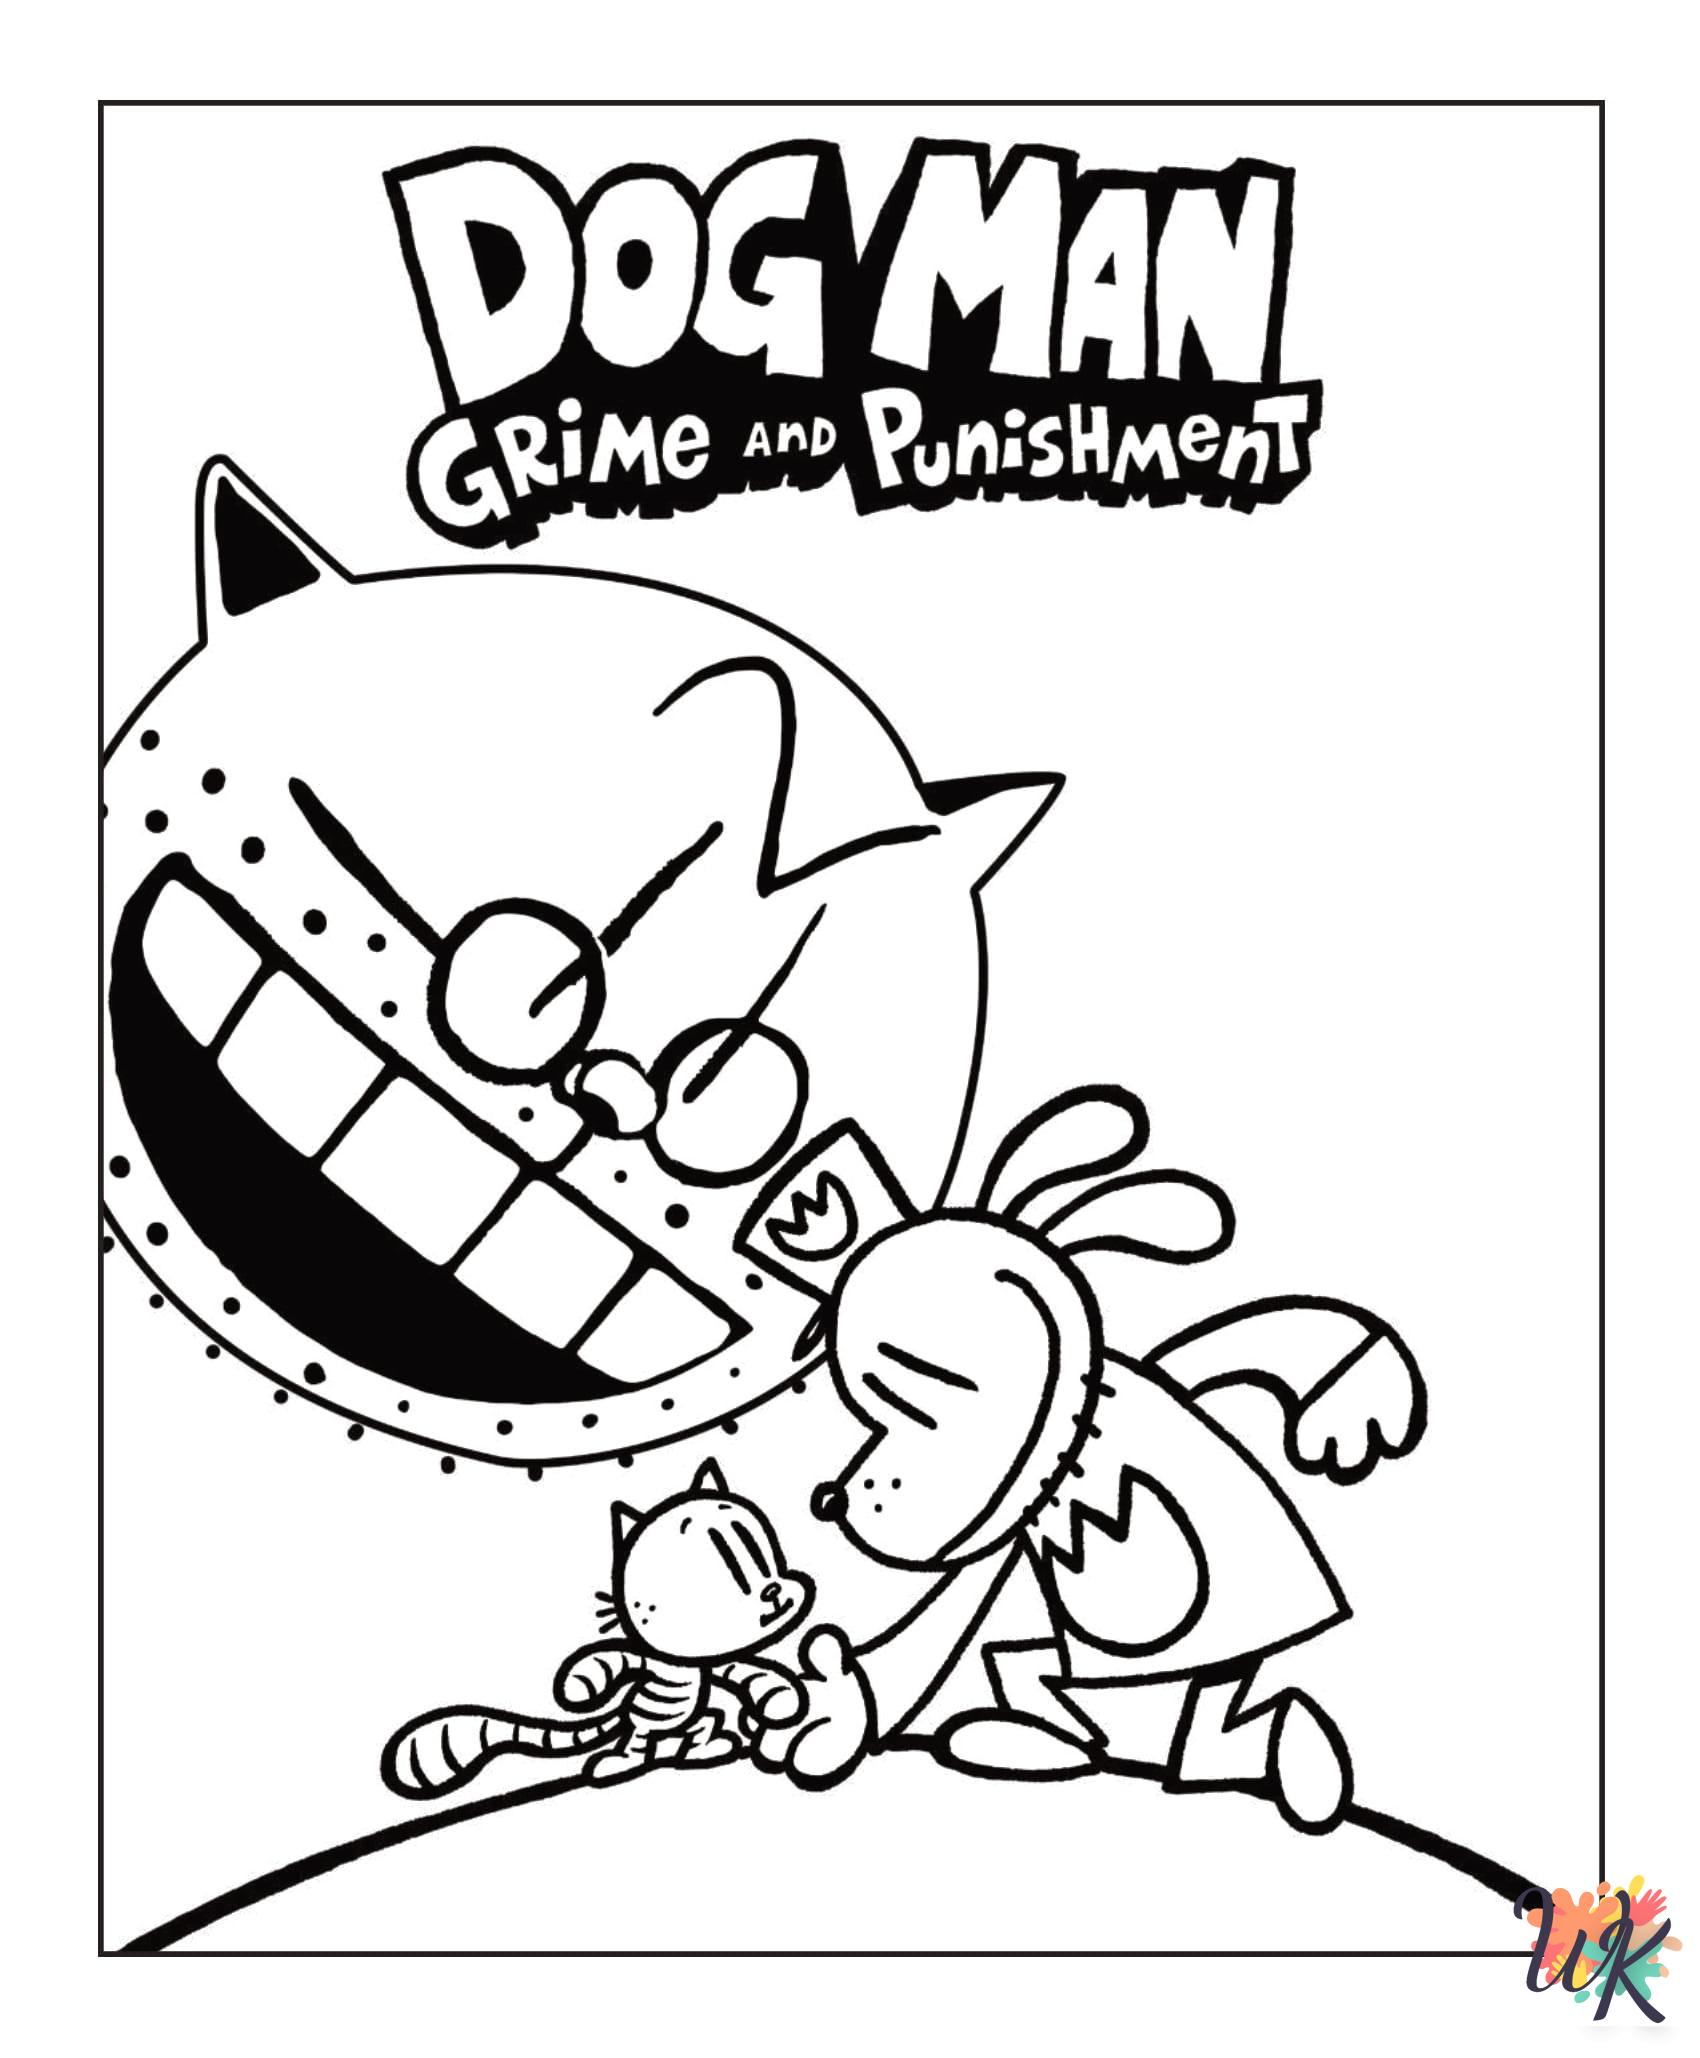 Dog Man coloring pages to print